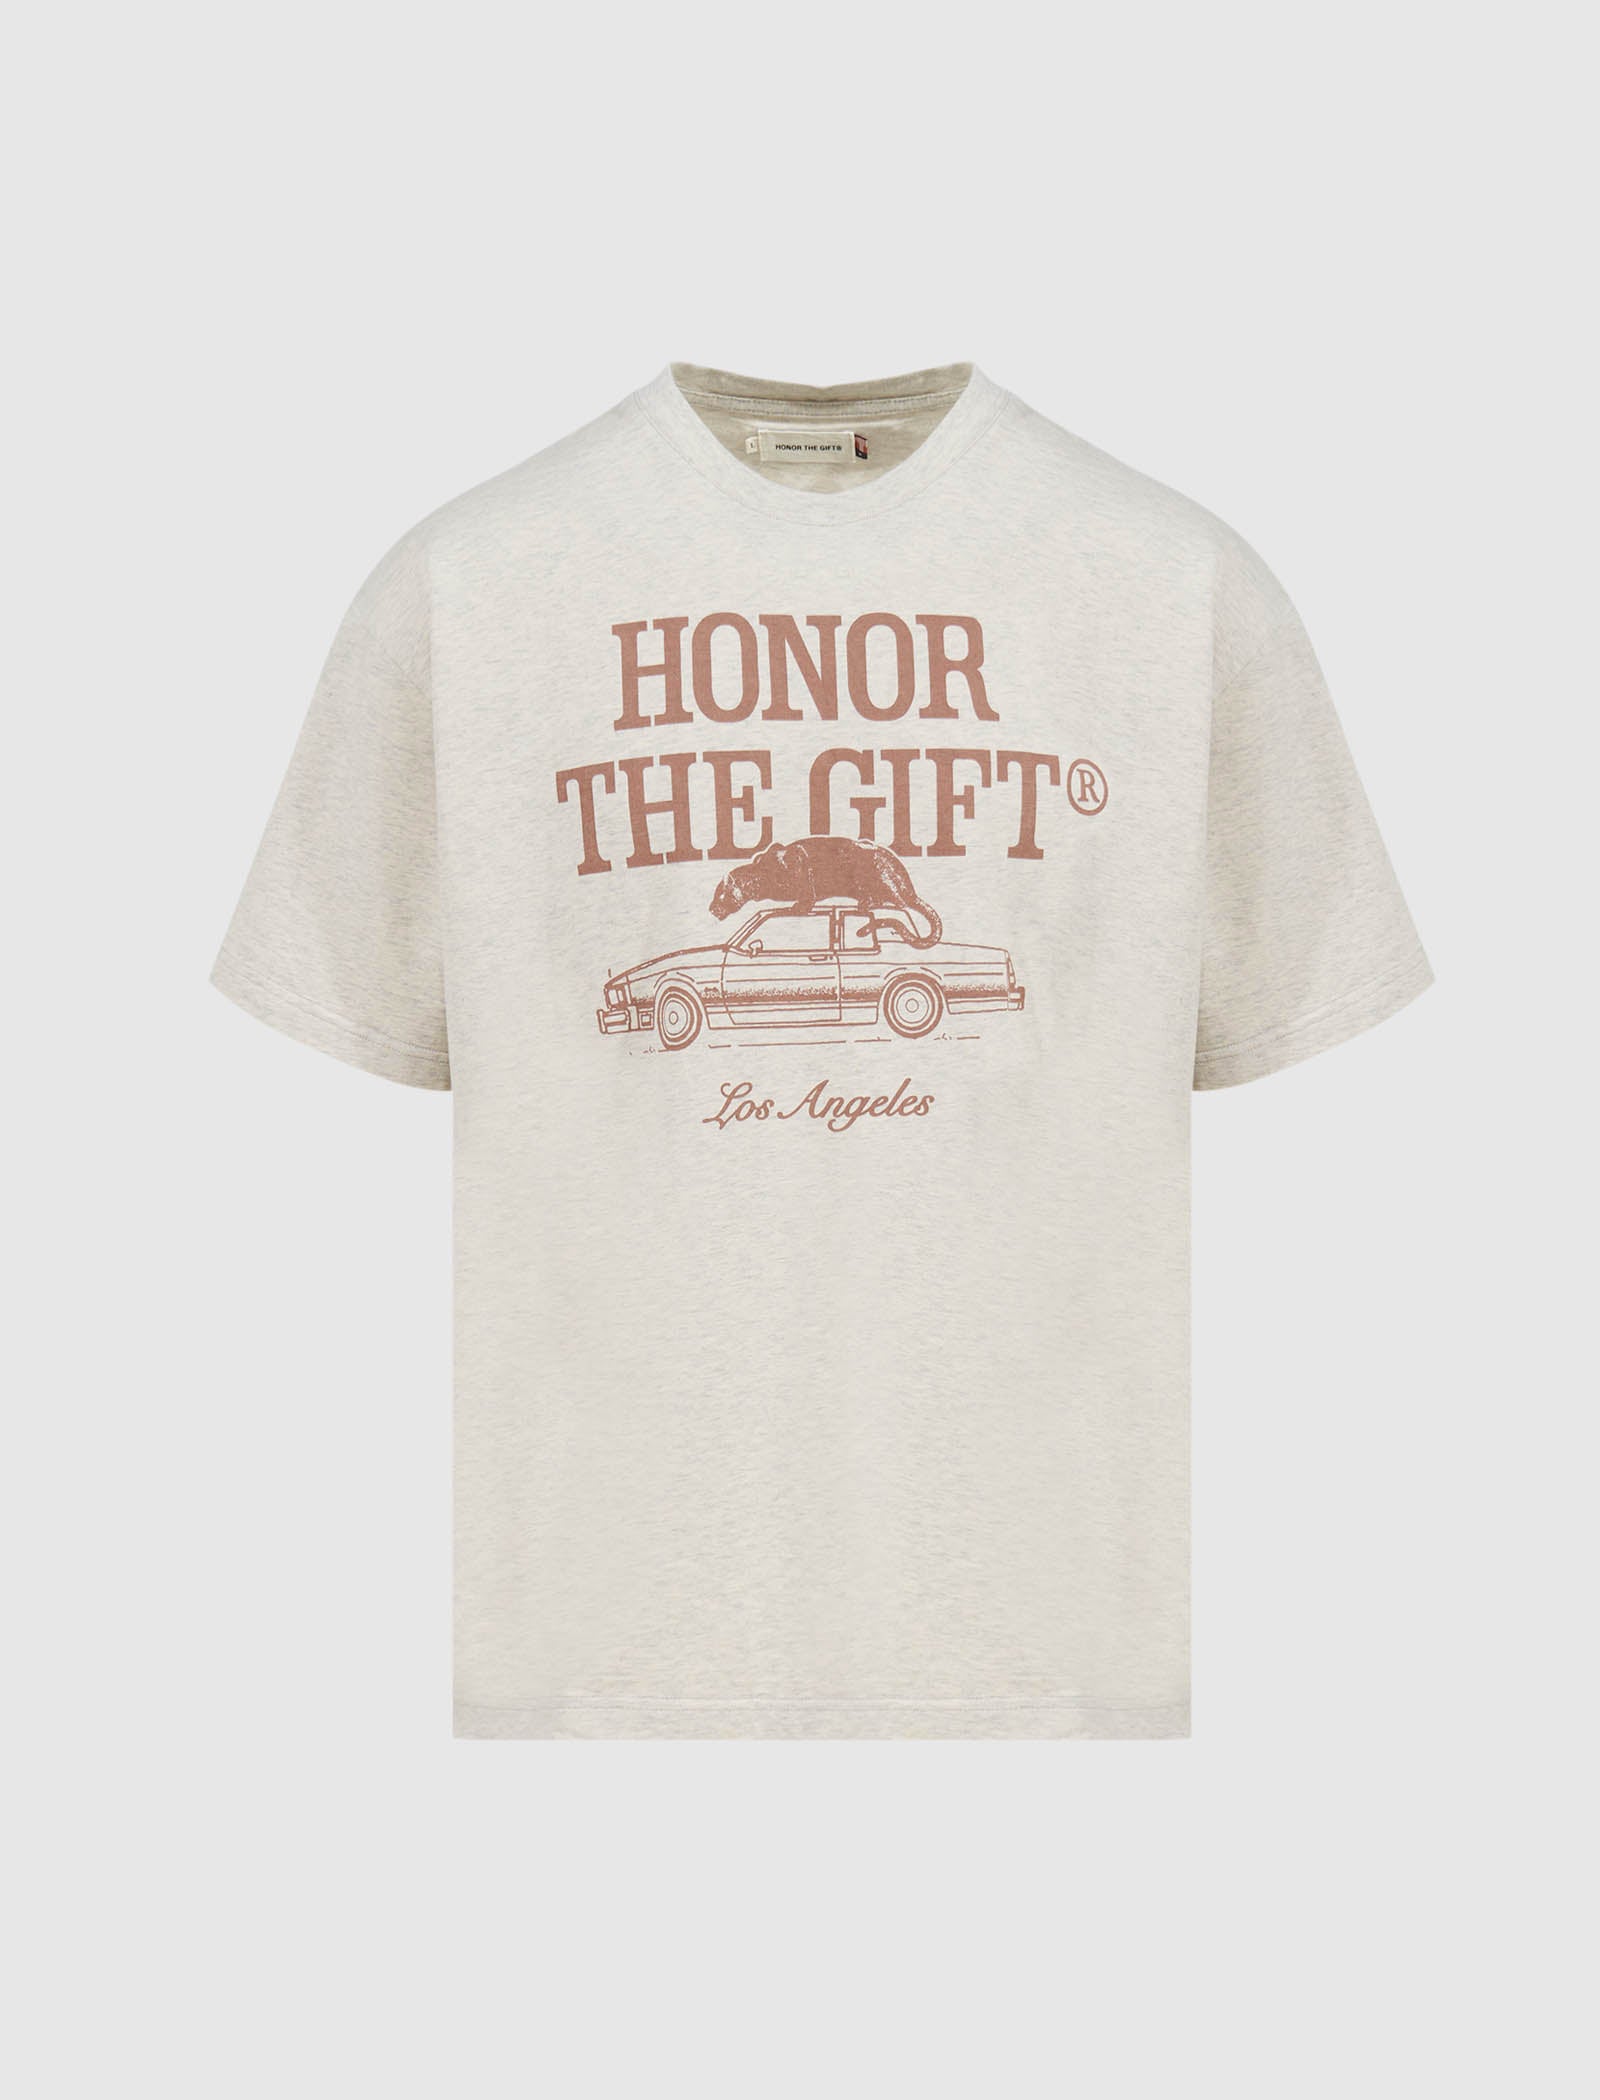 HONOR THE GIFT A-SPRING HTG PACK TEE